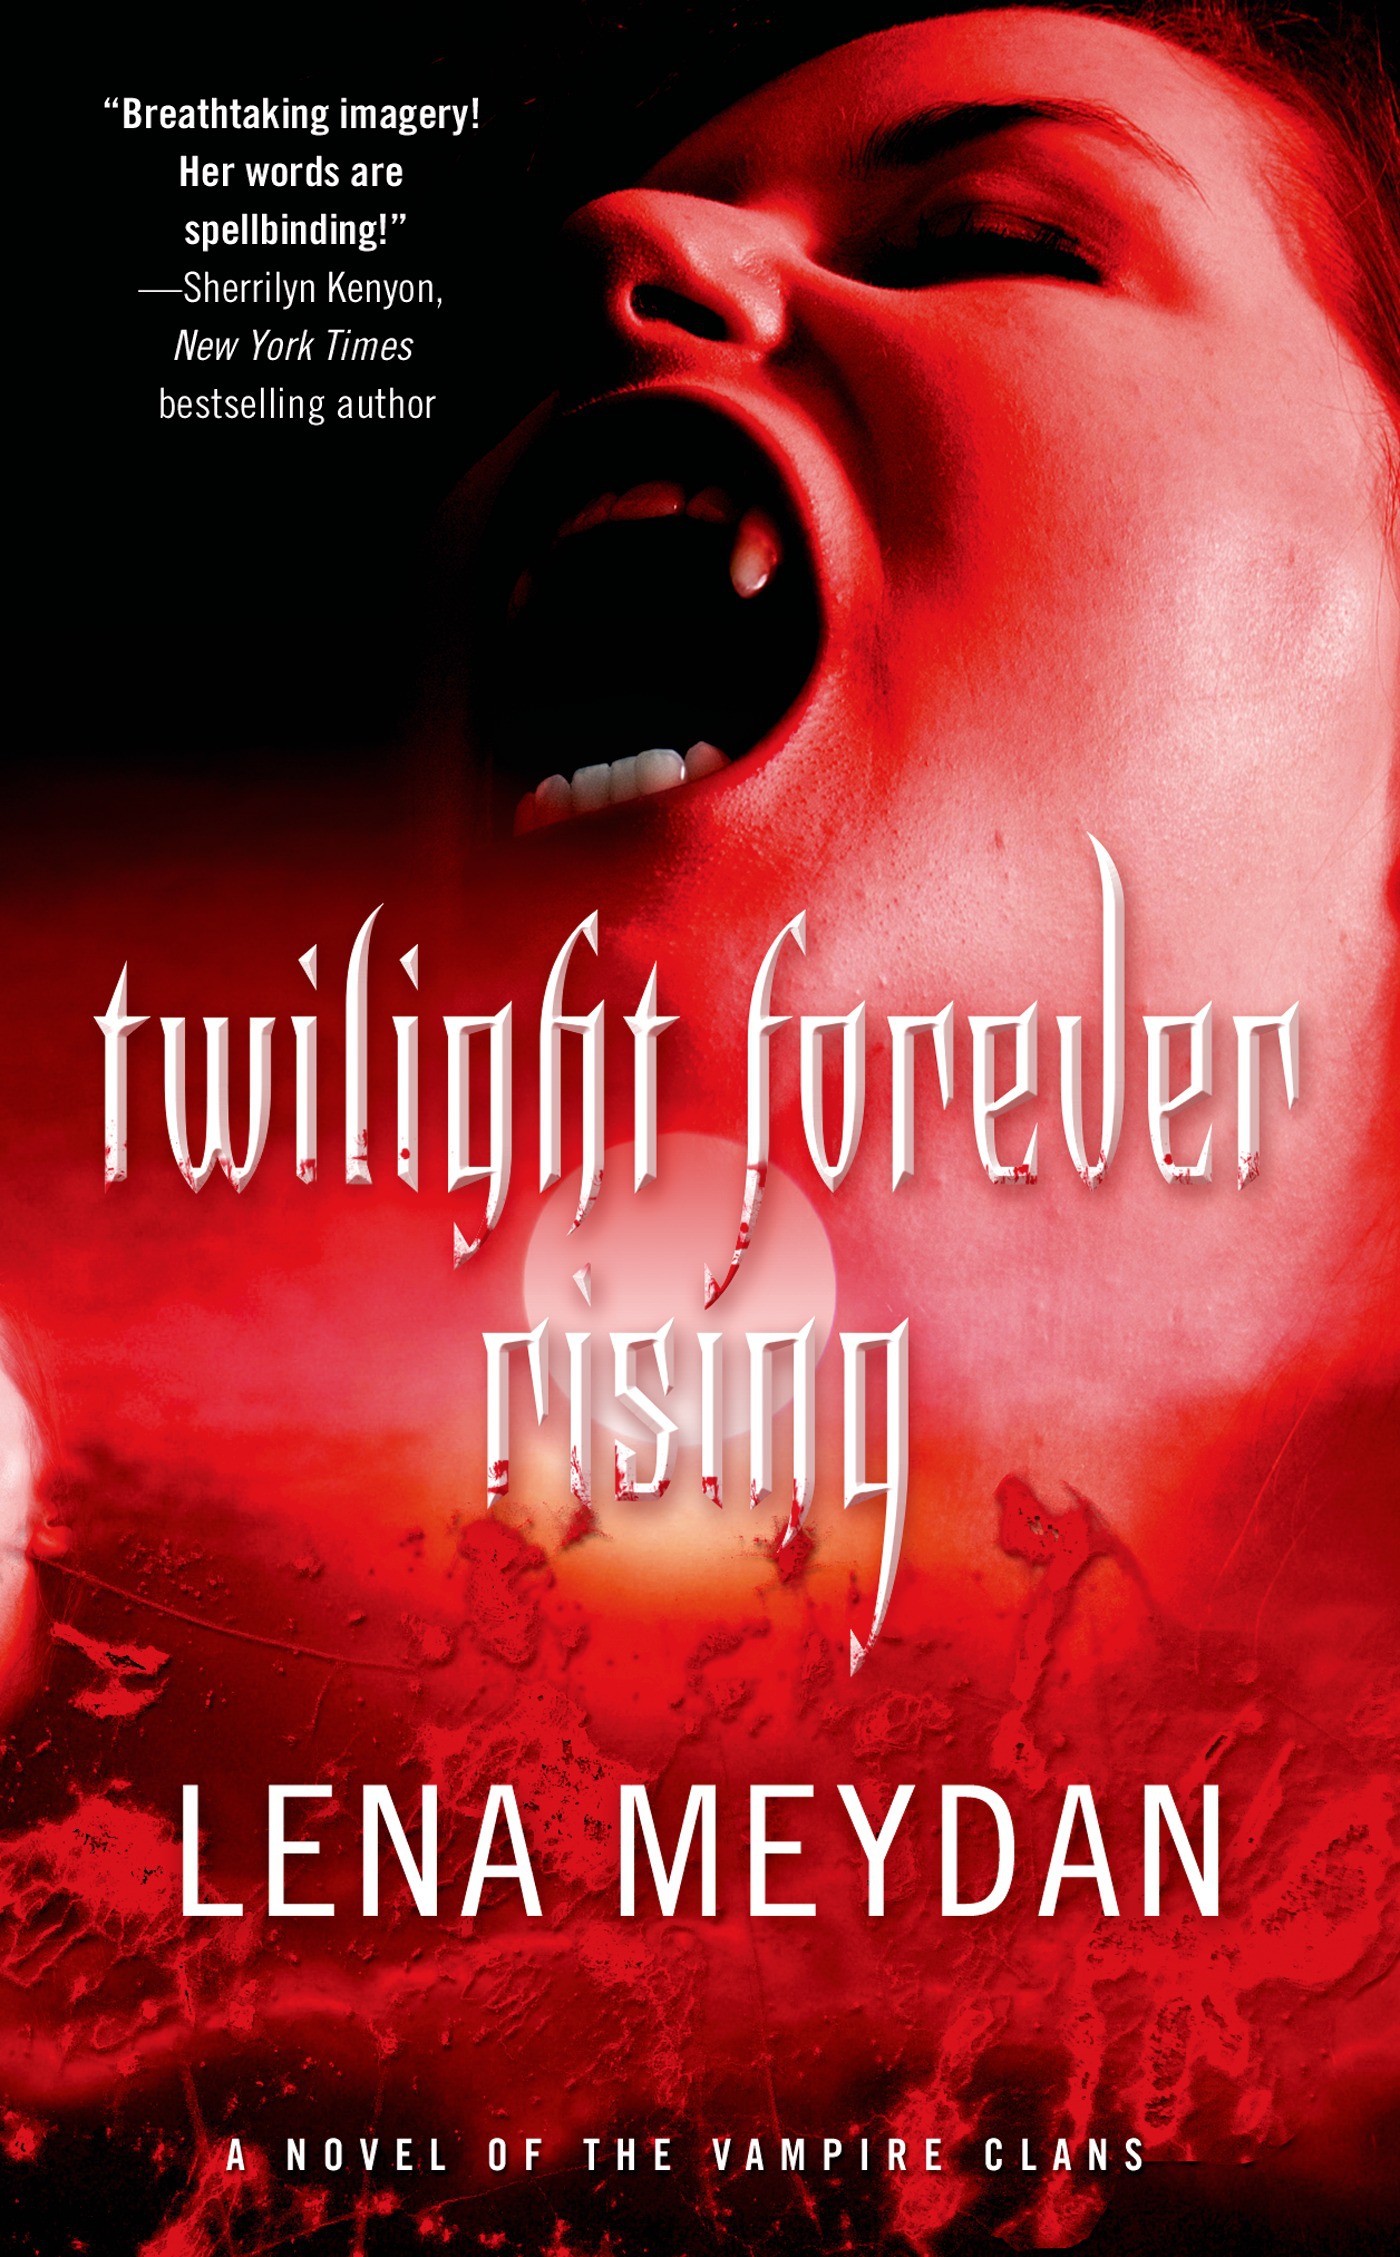 Twilight Forever Rising : A Novel of the Vampire Clans by Lena Meydan